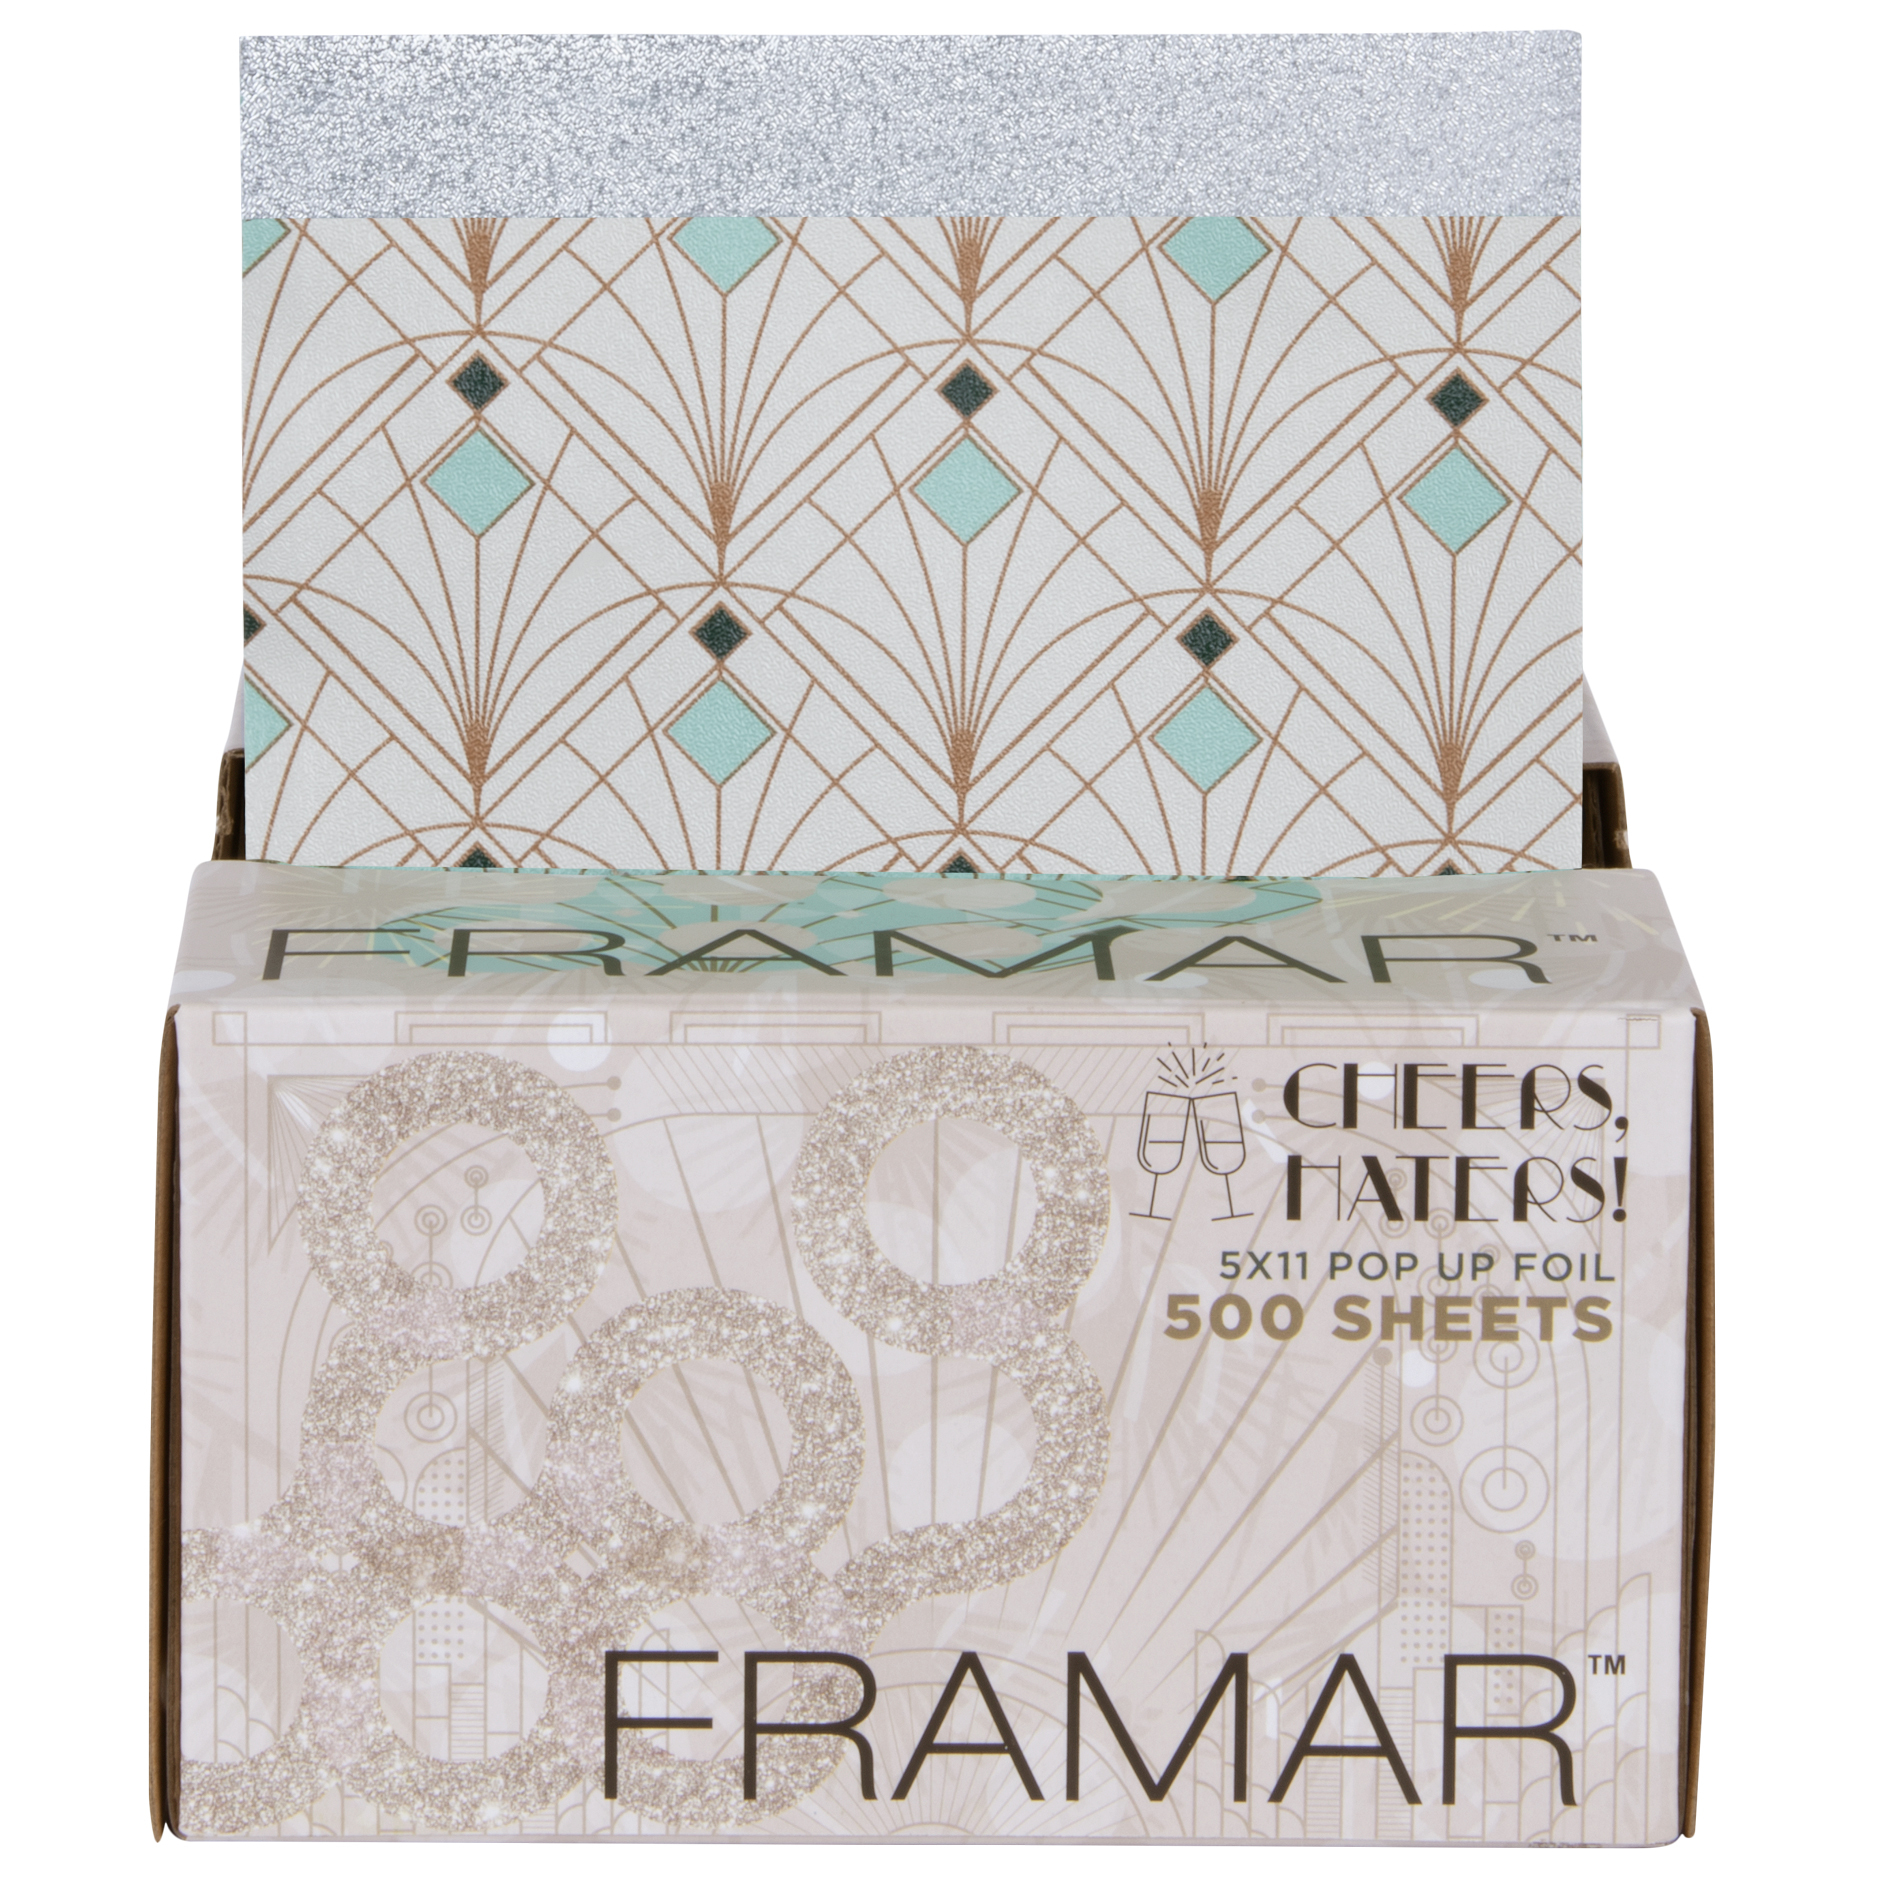 Framar FOIL: Cheers Haters Pop Up Embossed 5 x 11, 500 ct